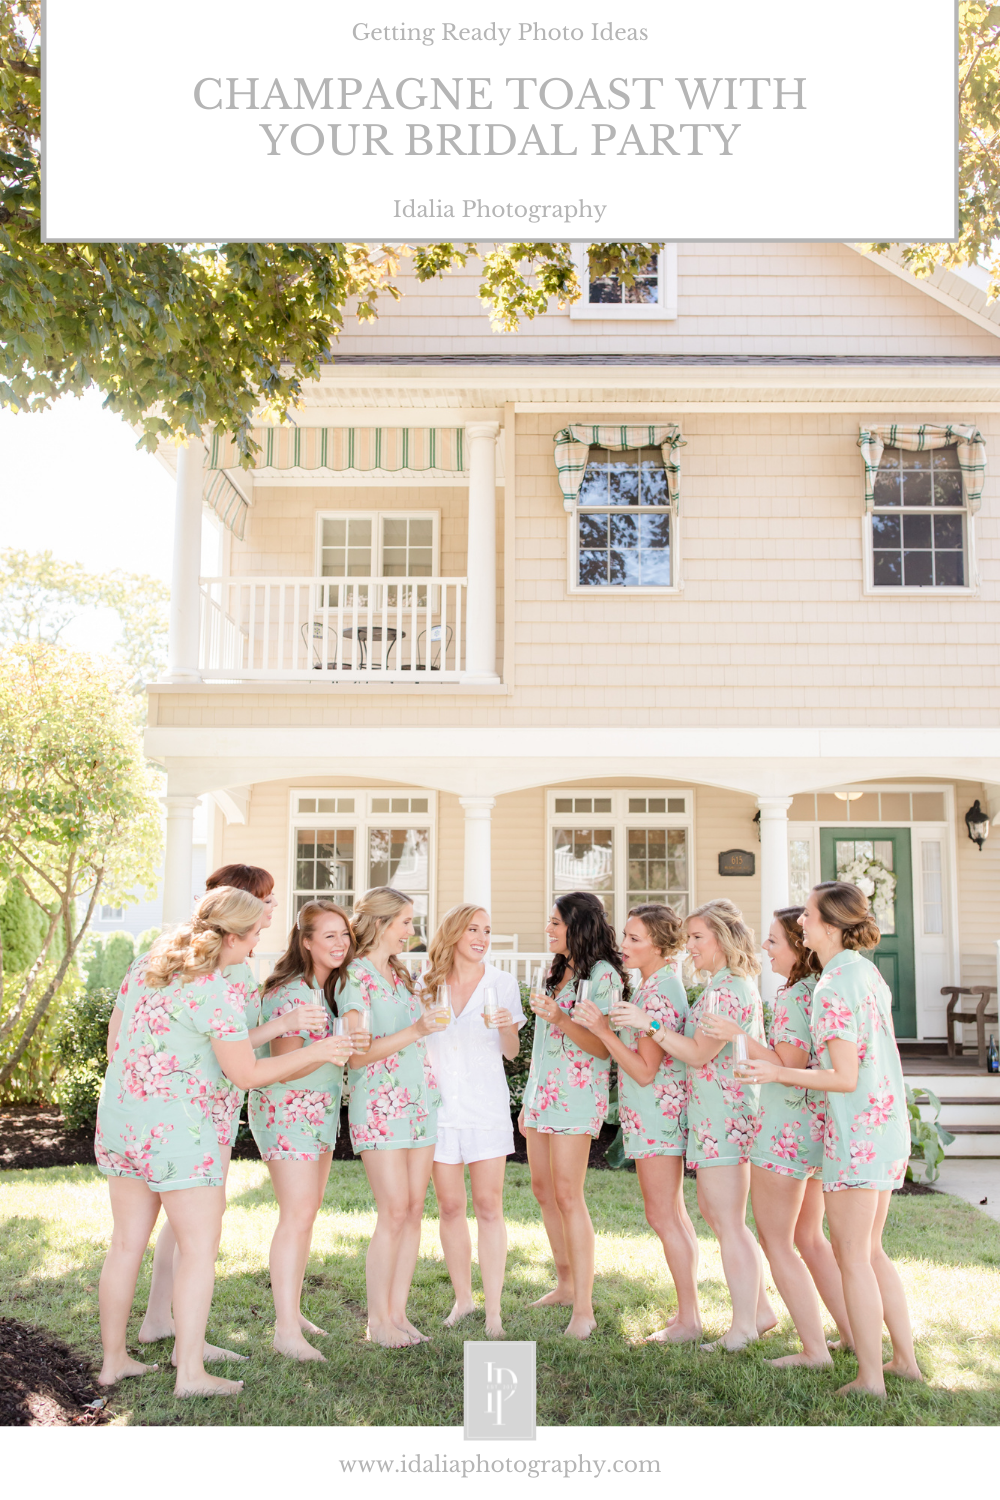 inspiration for getting ready photos on wedding day with bridesmaids